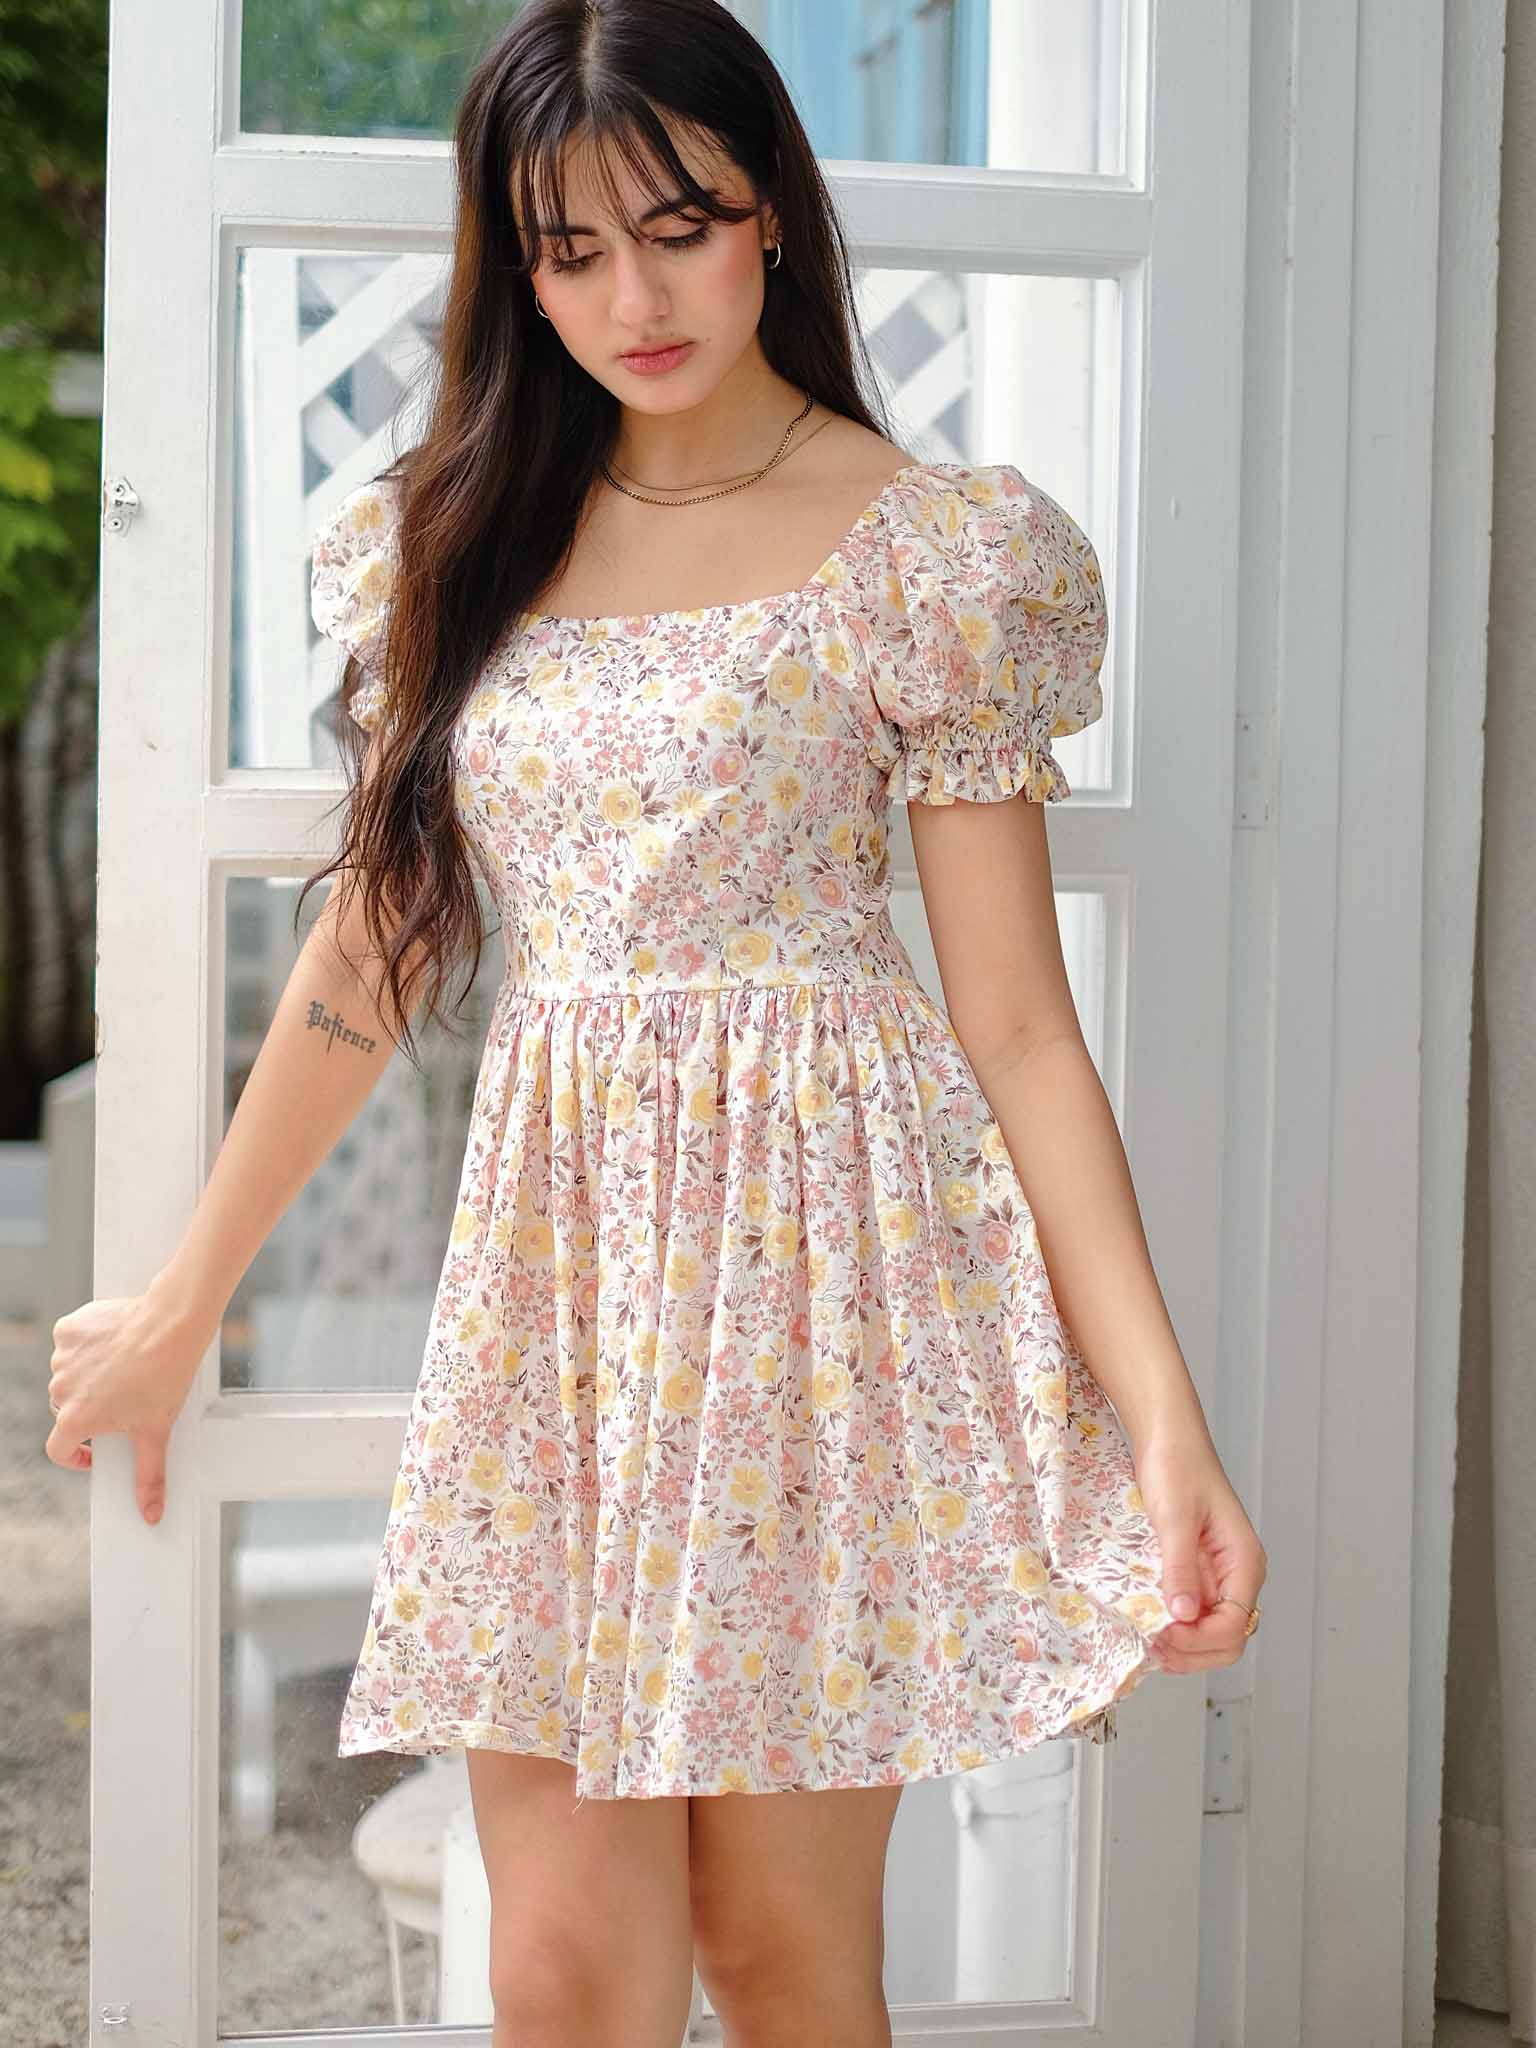 belle baby doll dress - Floral cream